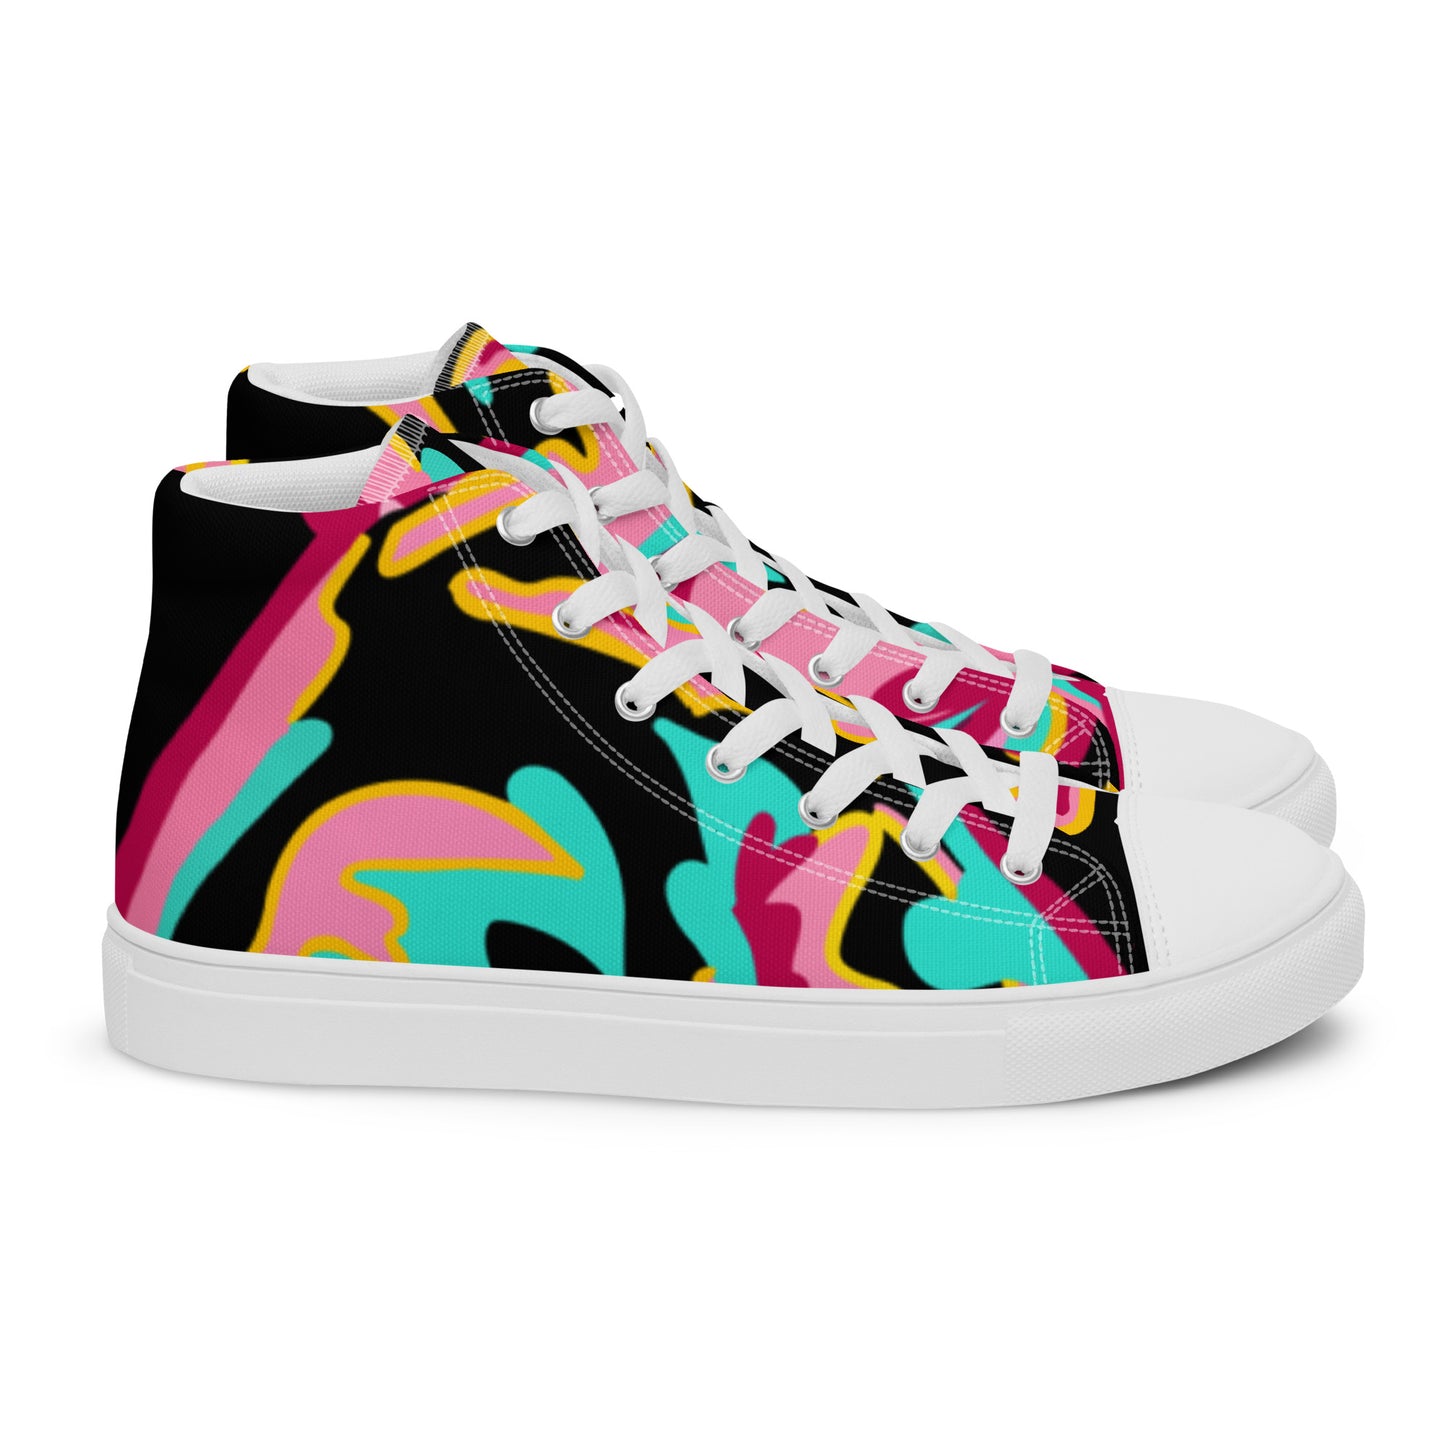 Body Love "New Classic" High Top Canvas Shoes- Men's Sizing